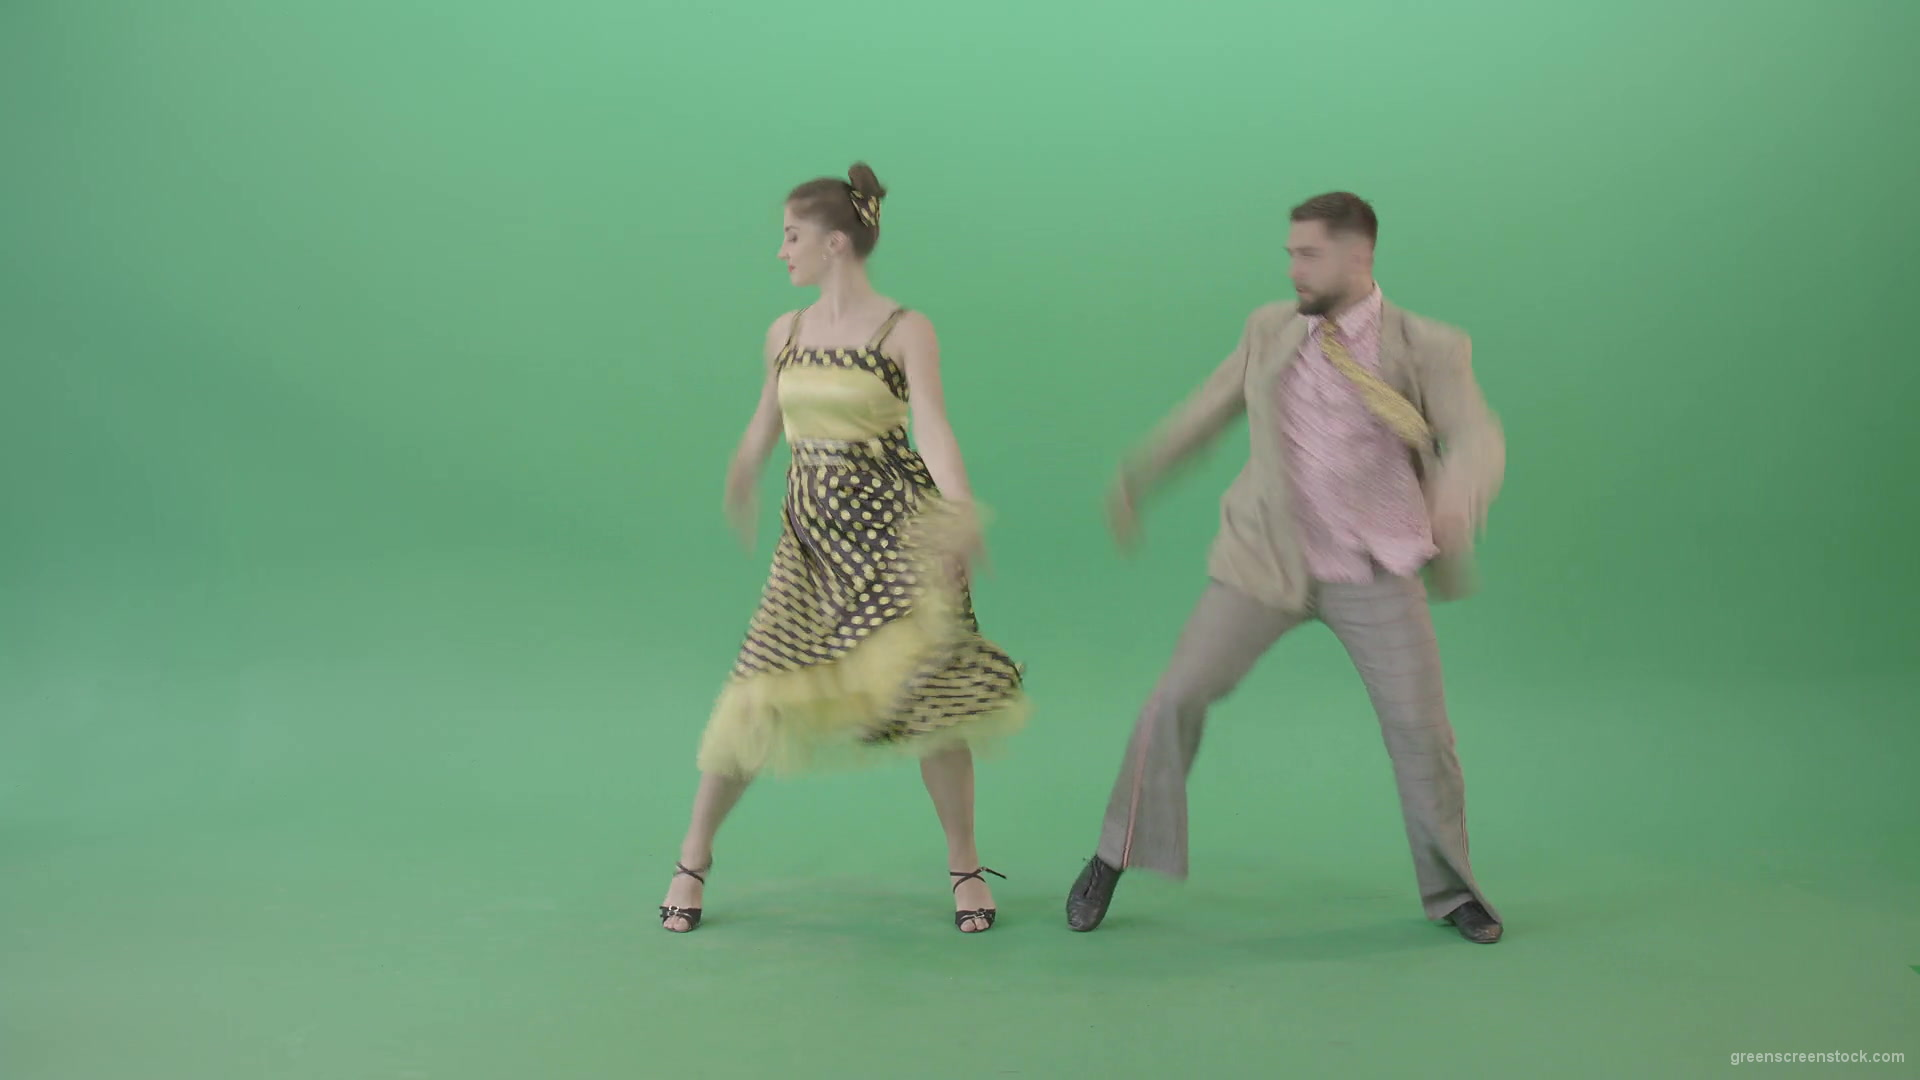 Beautiful-man-and-woman-dancing-Lindy-Hop-Jazz-and-Swing-dance-isolated-on-Green-Screen-4K-Video-Footage-1920_007 Green Screen Stock